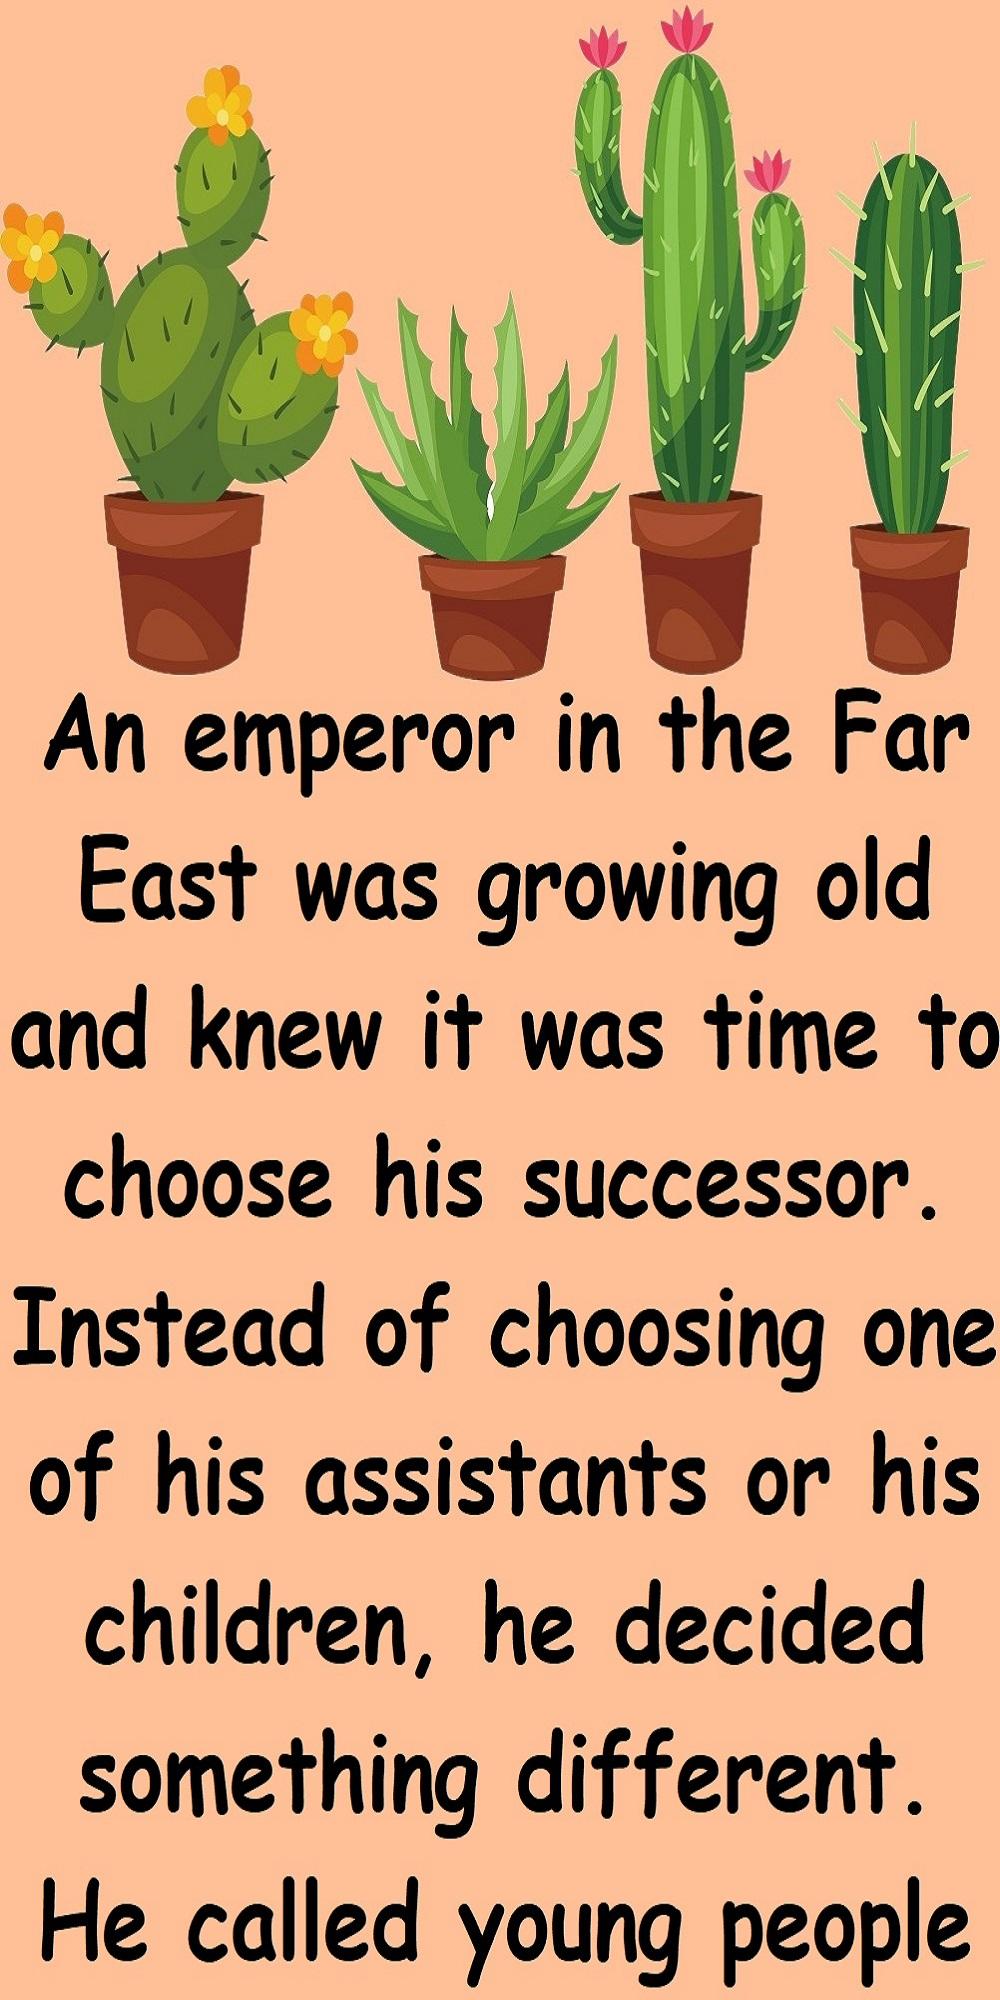 Moral Story The Emperors Seed p - Moral Story